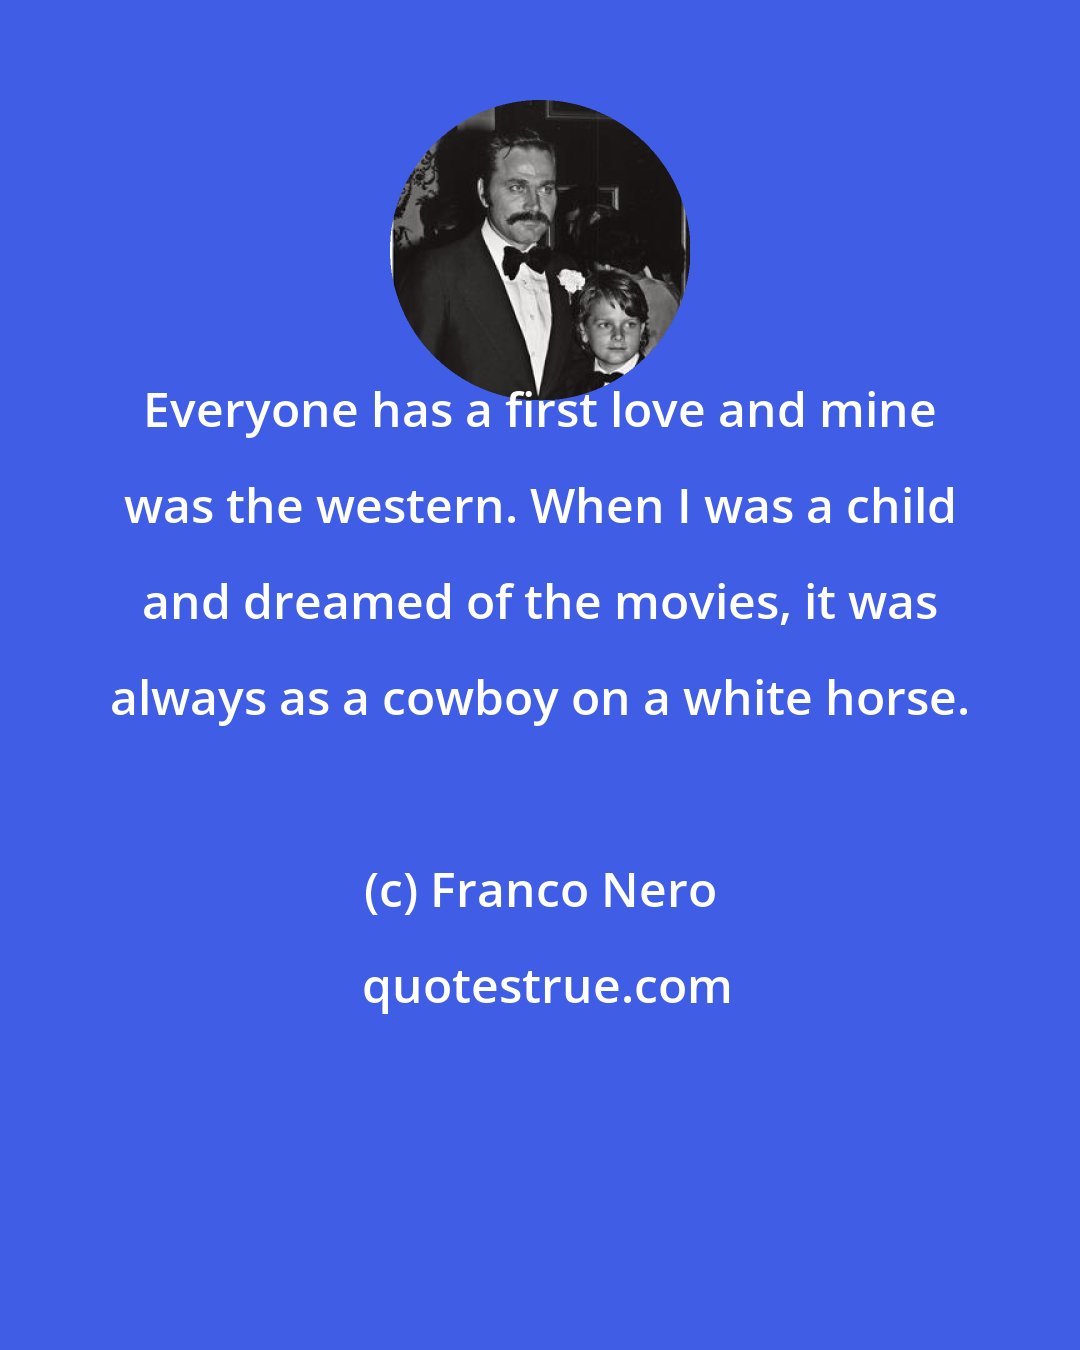 Franco Nero: Everyone has a first love and mine was the western. When I was a child and dreamed of the movies, it was always as a cowboy on a white horse.